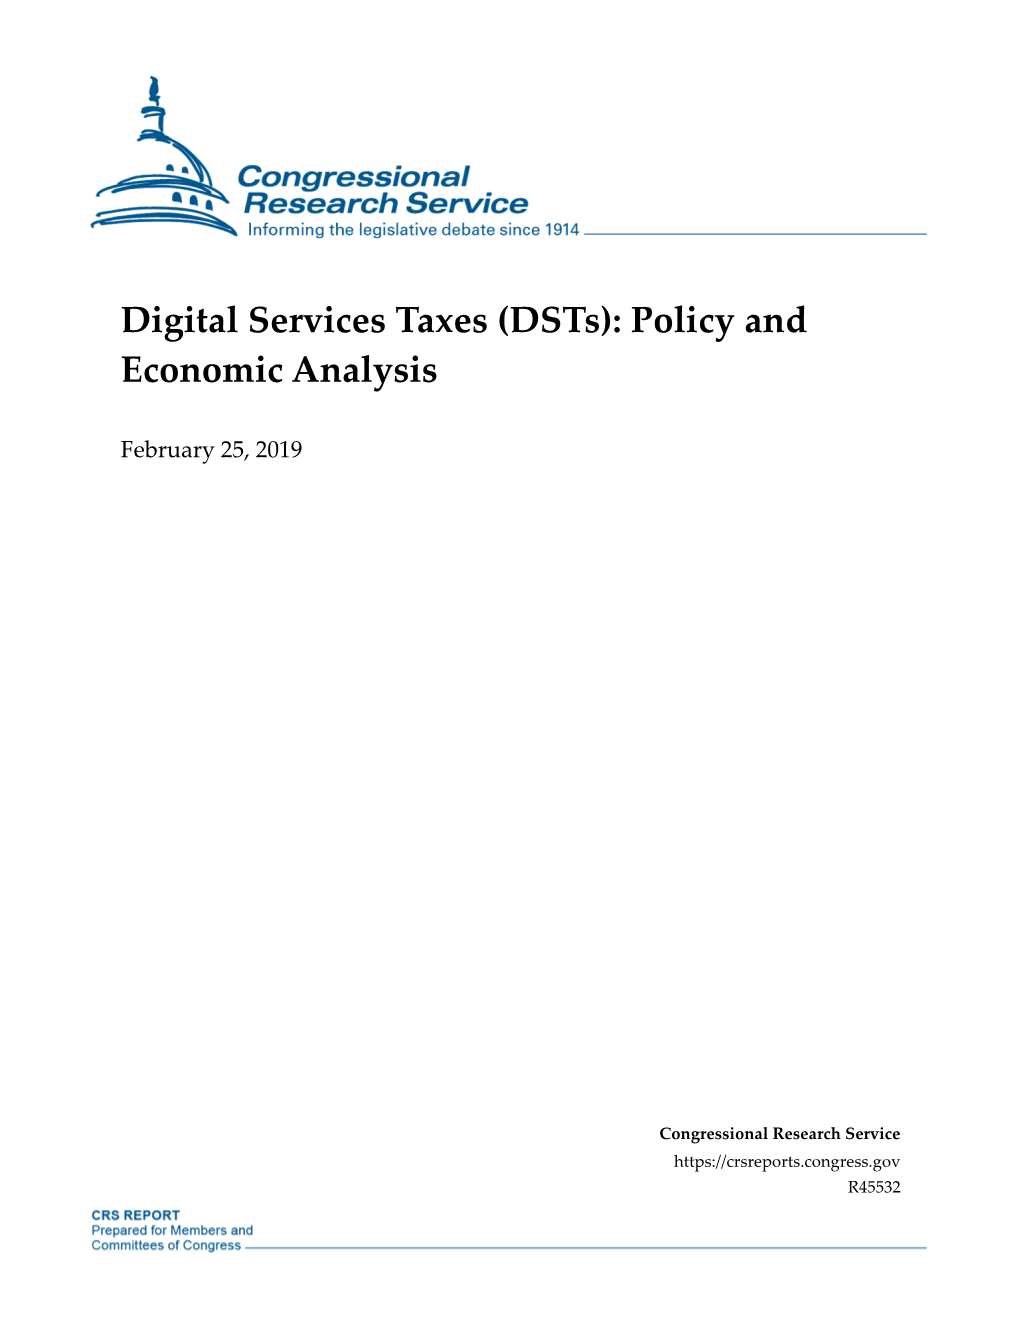 Digital Services Taxes (Dsts): Policy and Economic Analysis